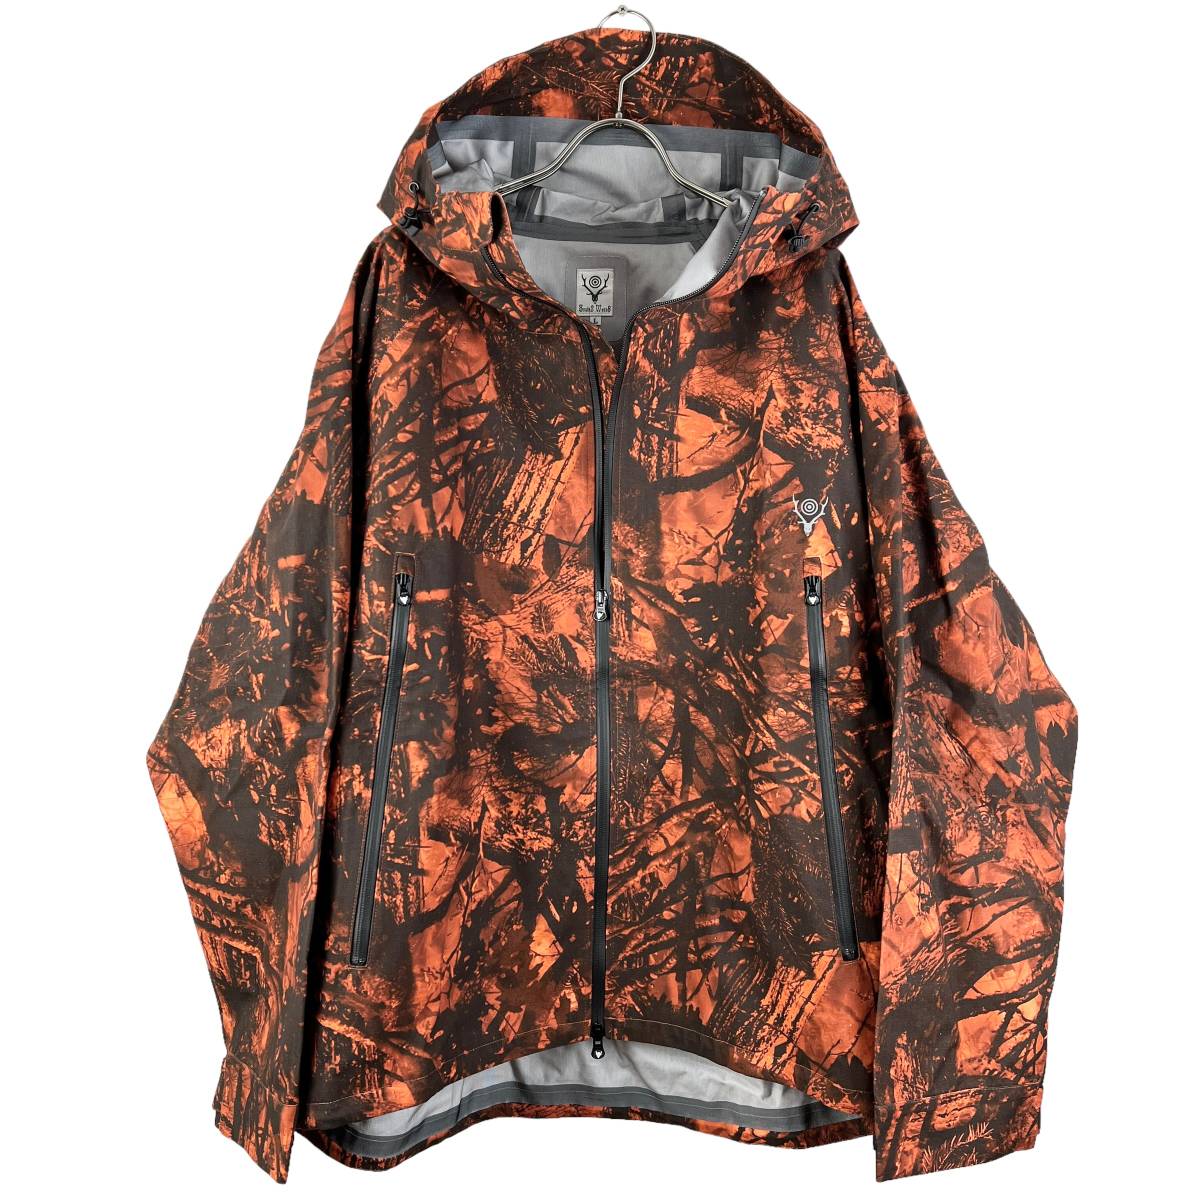 South2 West8(サウス2 ウエスト8) Weather Effect Water Proof Jacket